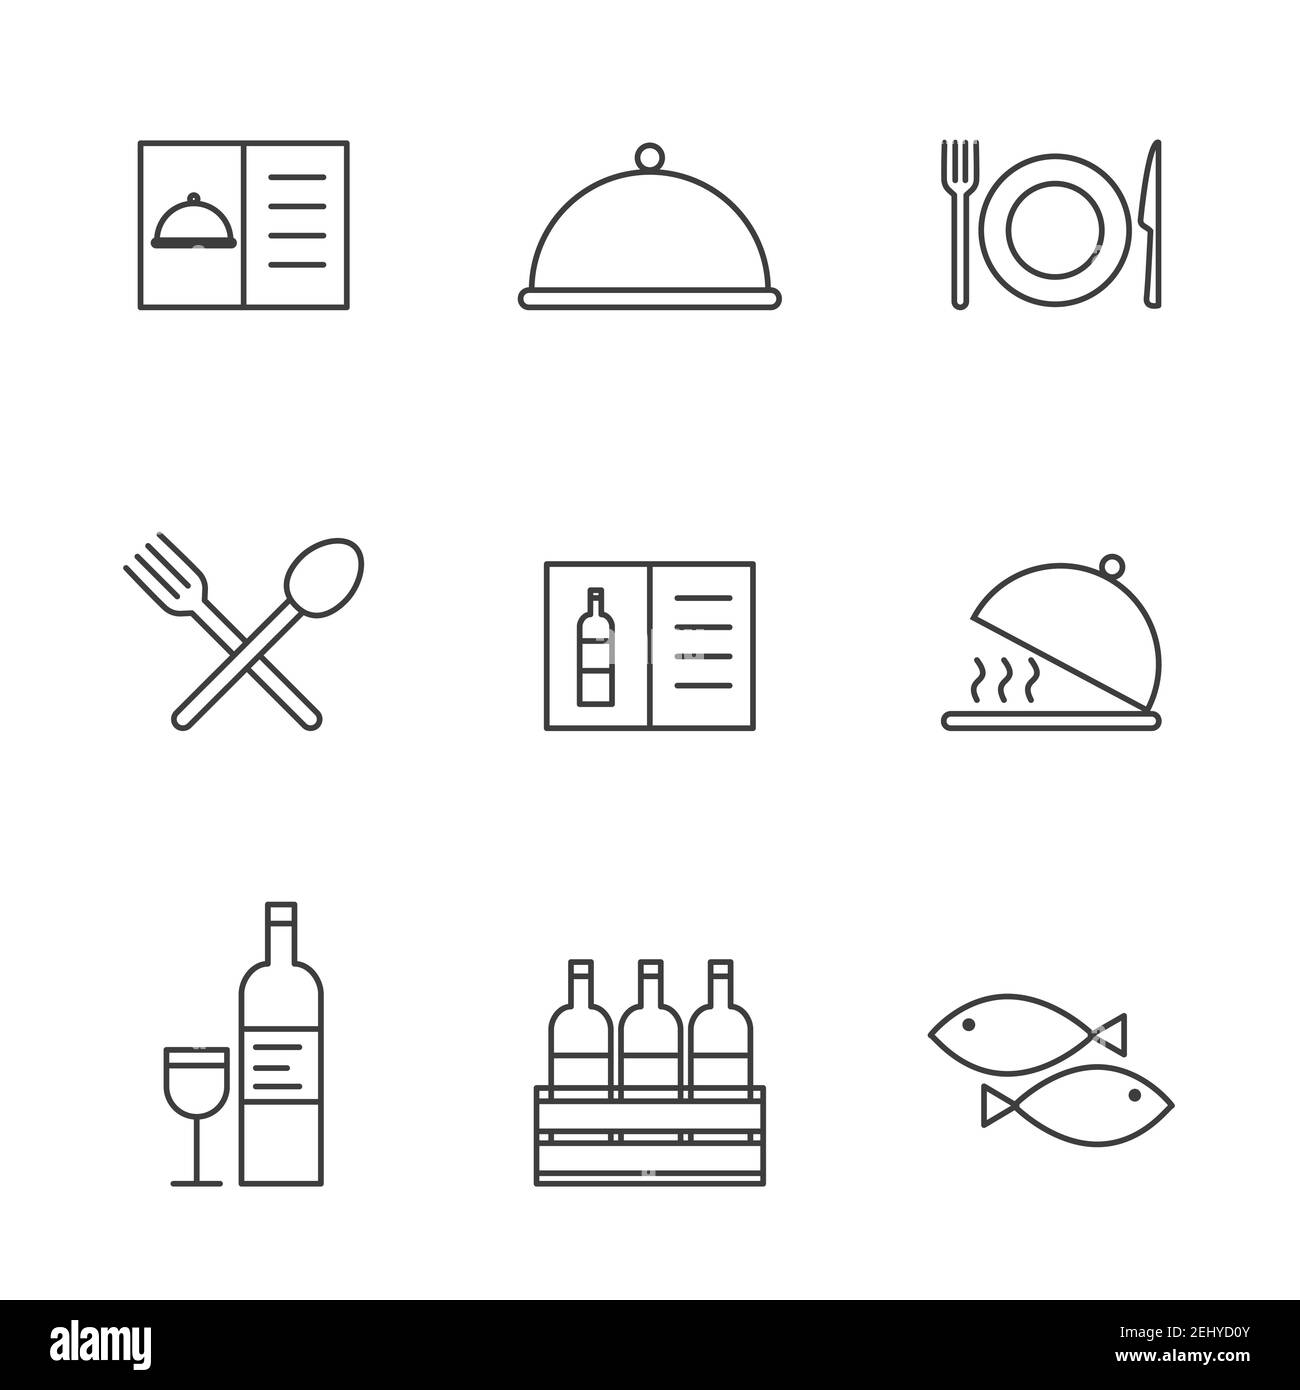 Set of Simple restaurant utensils icon in trendy line style isolated on white background for web apps and mobile concept. Vector Illustration. EPS10 Stock Vector